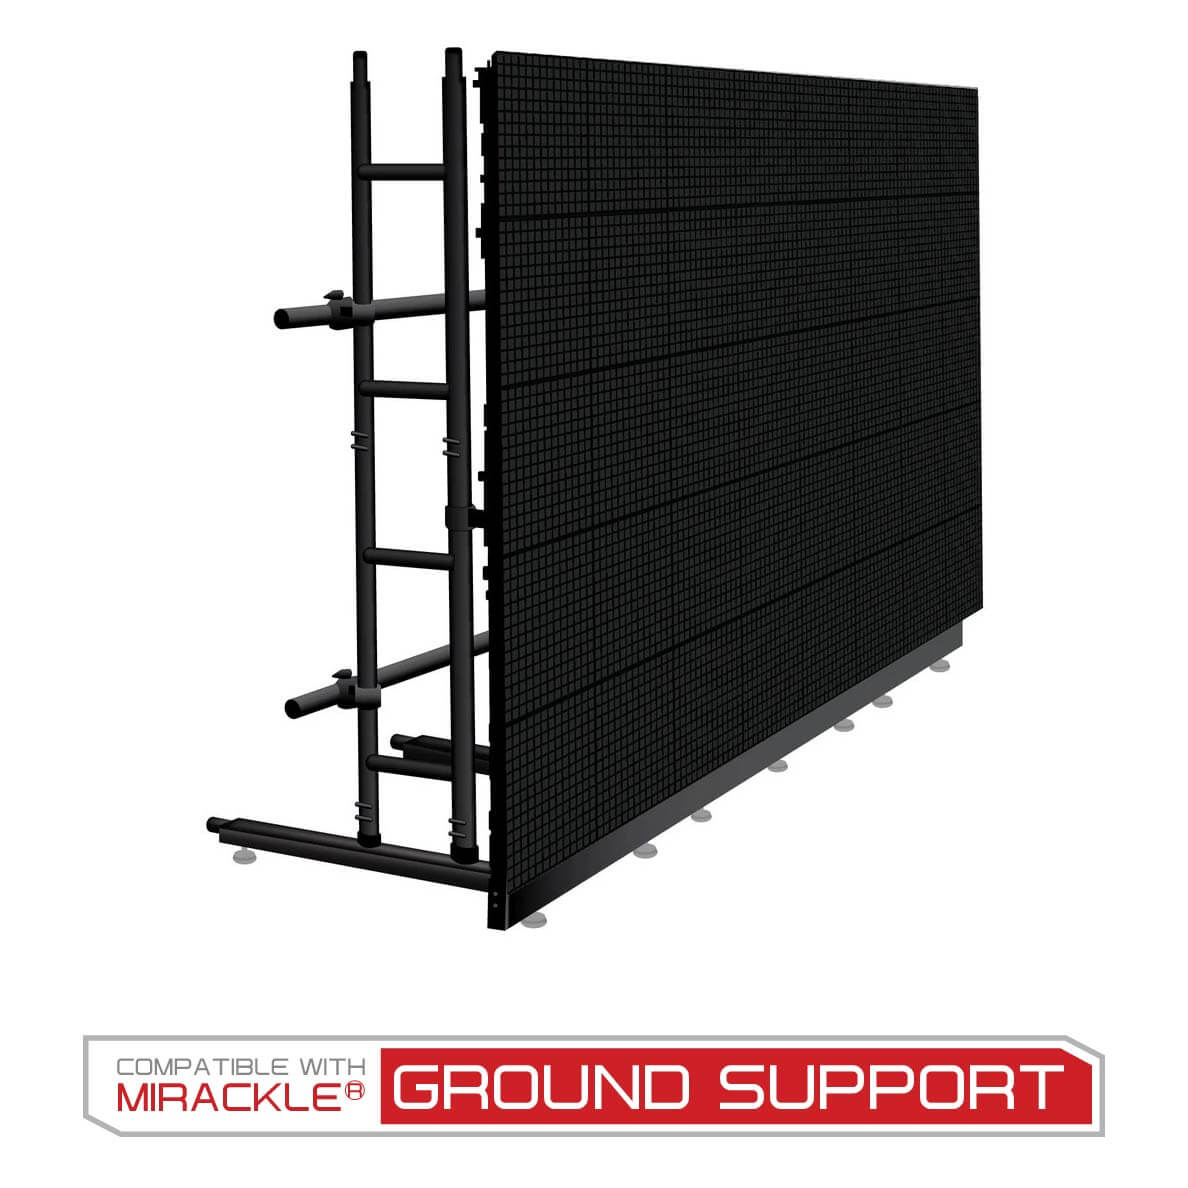 Picture of a black color ground support device